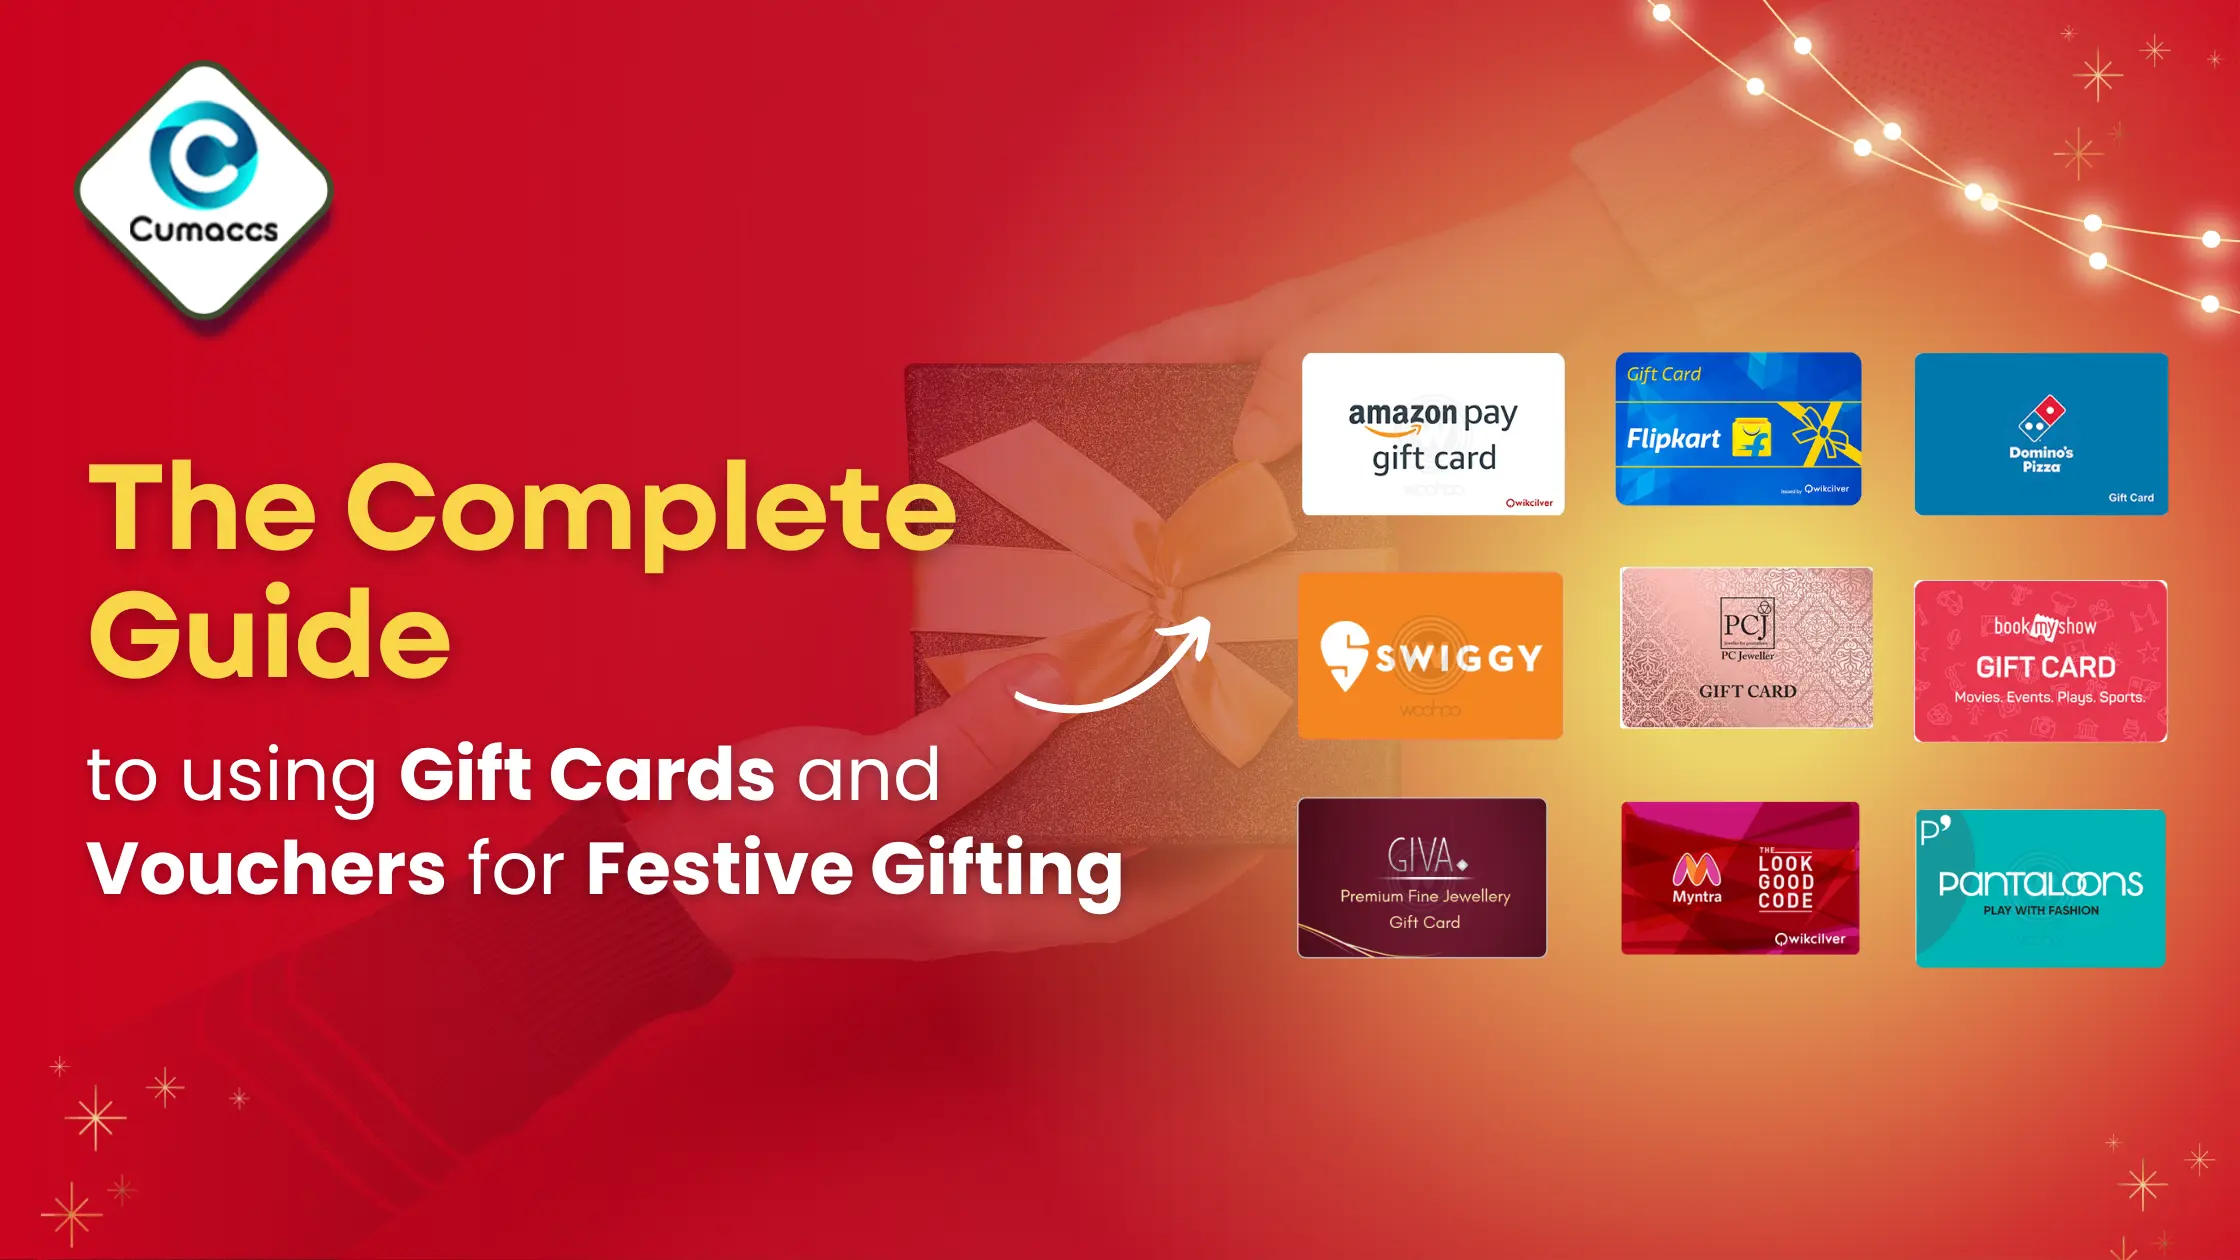 The Complete Guide to Using Gift Cards and Vouchers for Festive Gifting